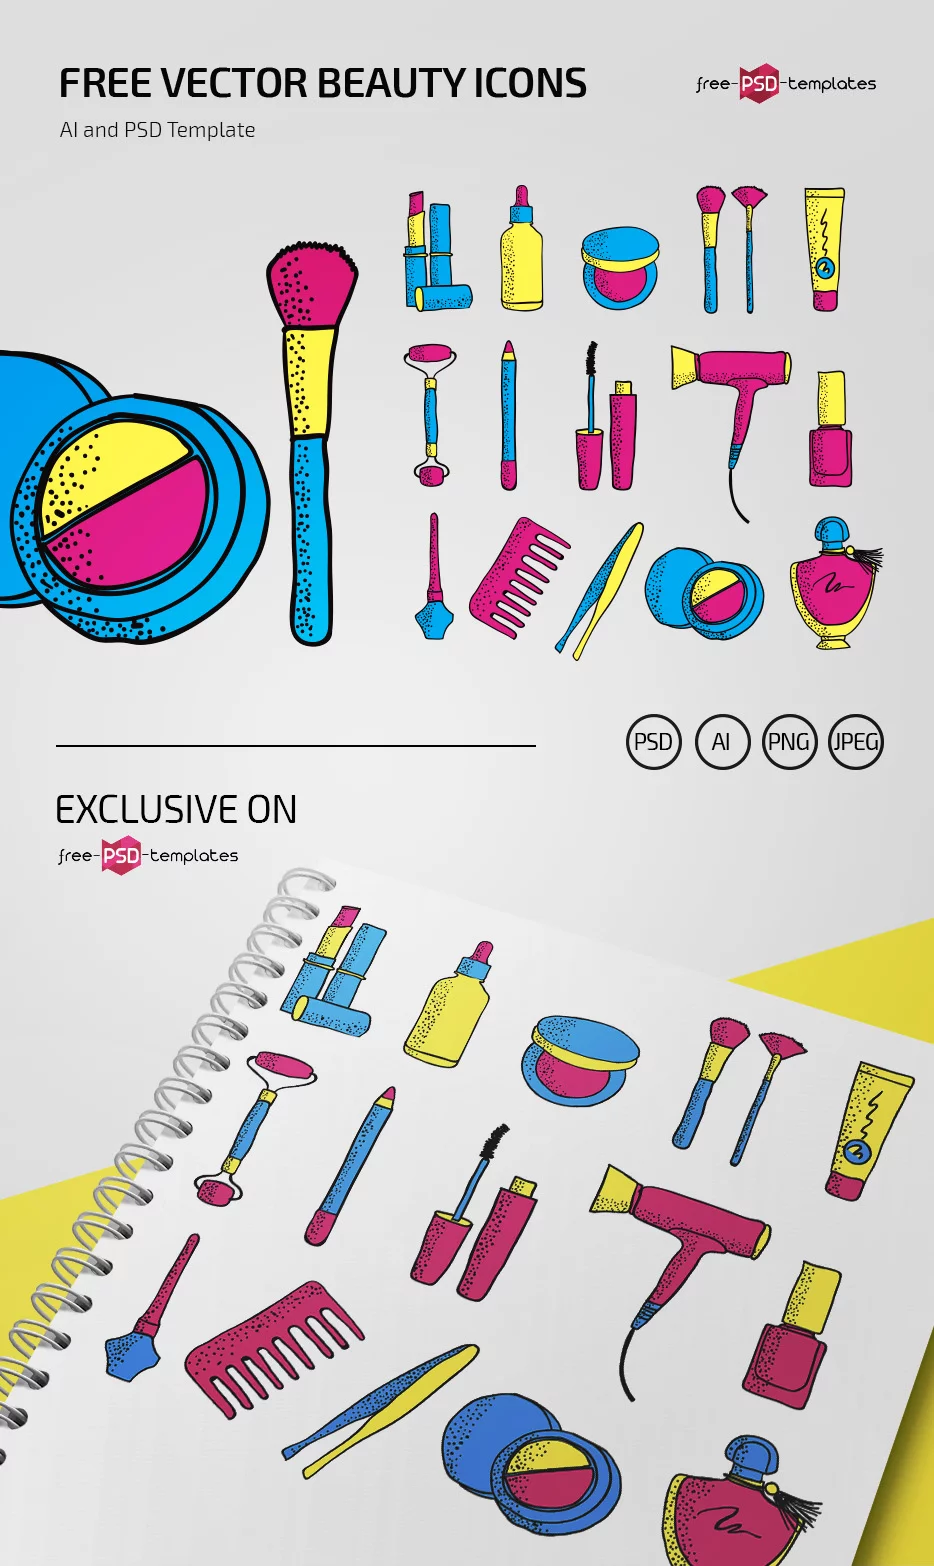 Free Vector Beauty Icons